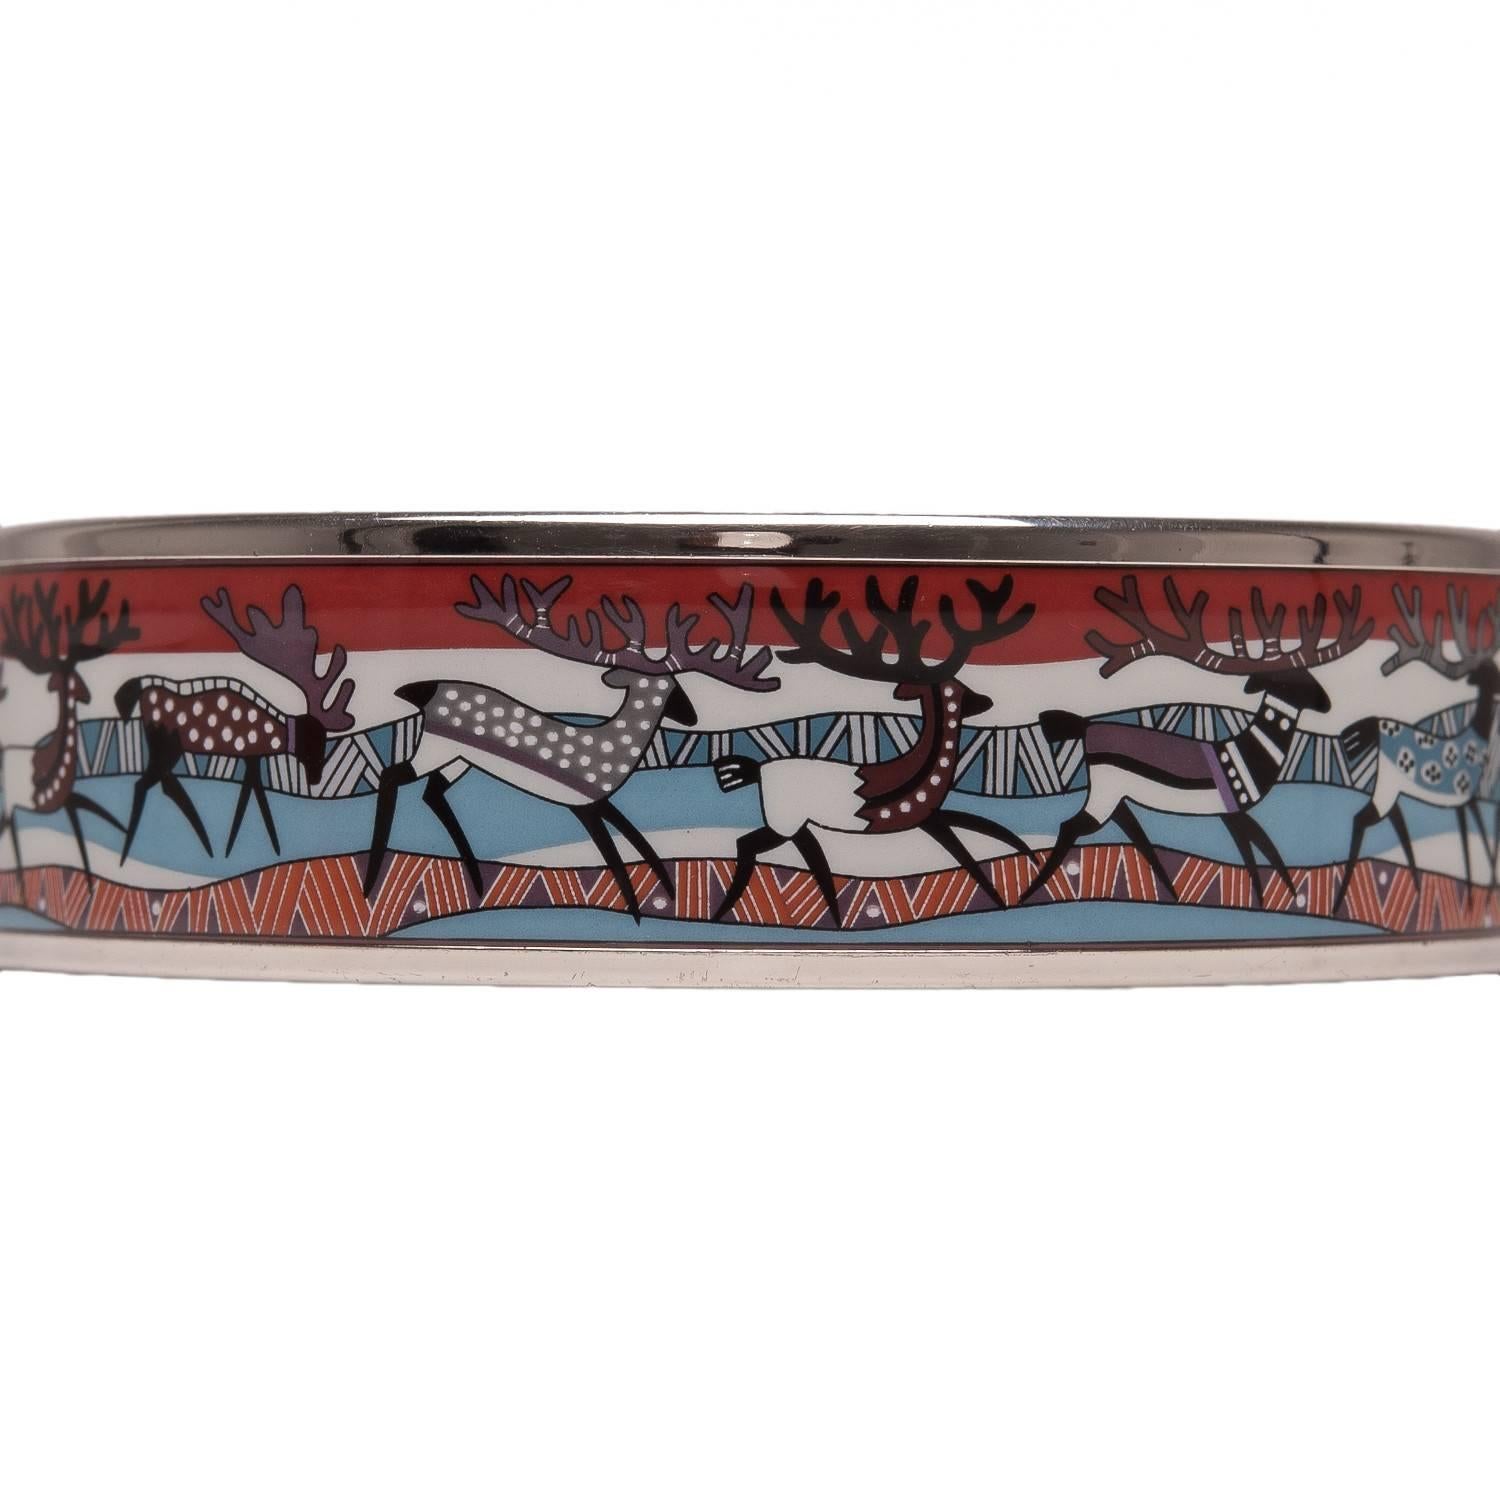 Hermes "Reindeer" wide printed enamel bracelet size PM (65).

This bracelet depicts reindeer walking together on a multicolored background with palladium hardware. 

Origin: Austria

Condition: Mint

Accompanied by: Hermes